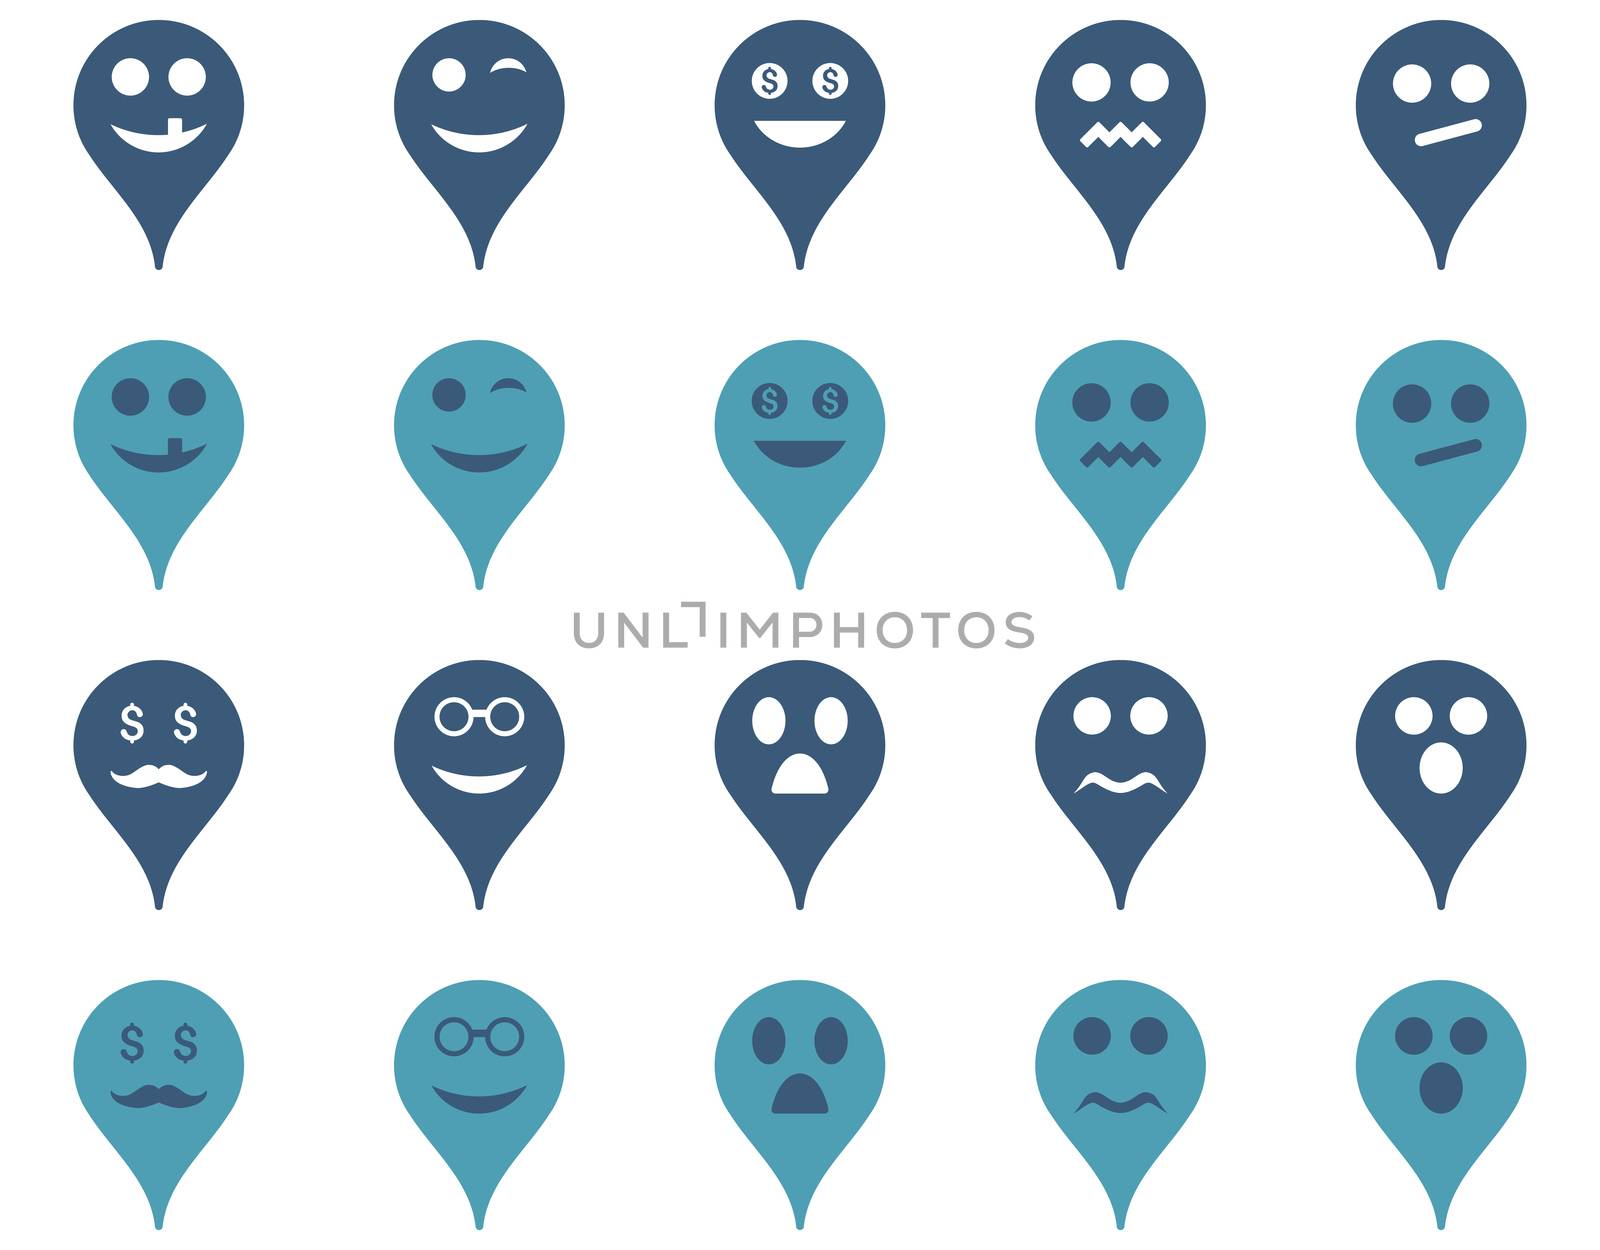 Emotion map marker icons. Glyph set style is bicolor flat images, cyan and blue symbols, isolated on a white background.